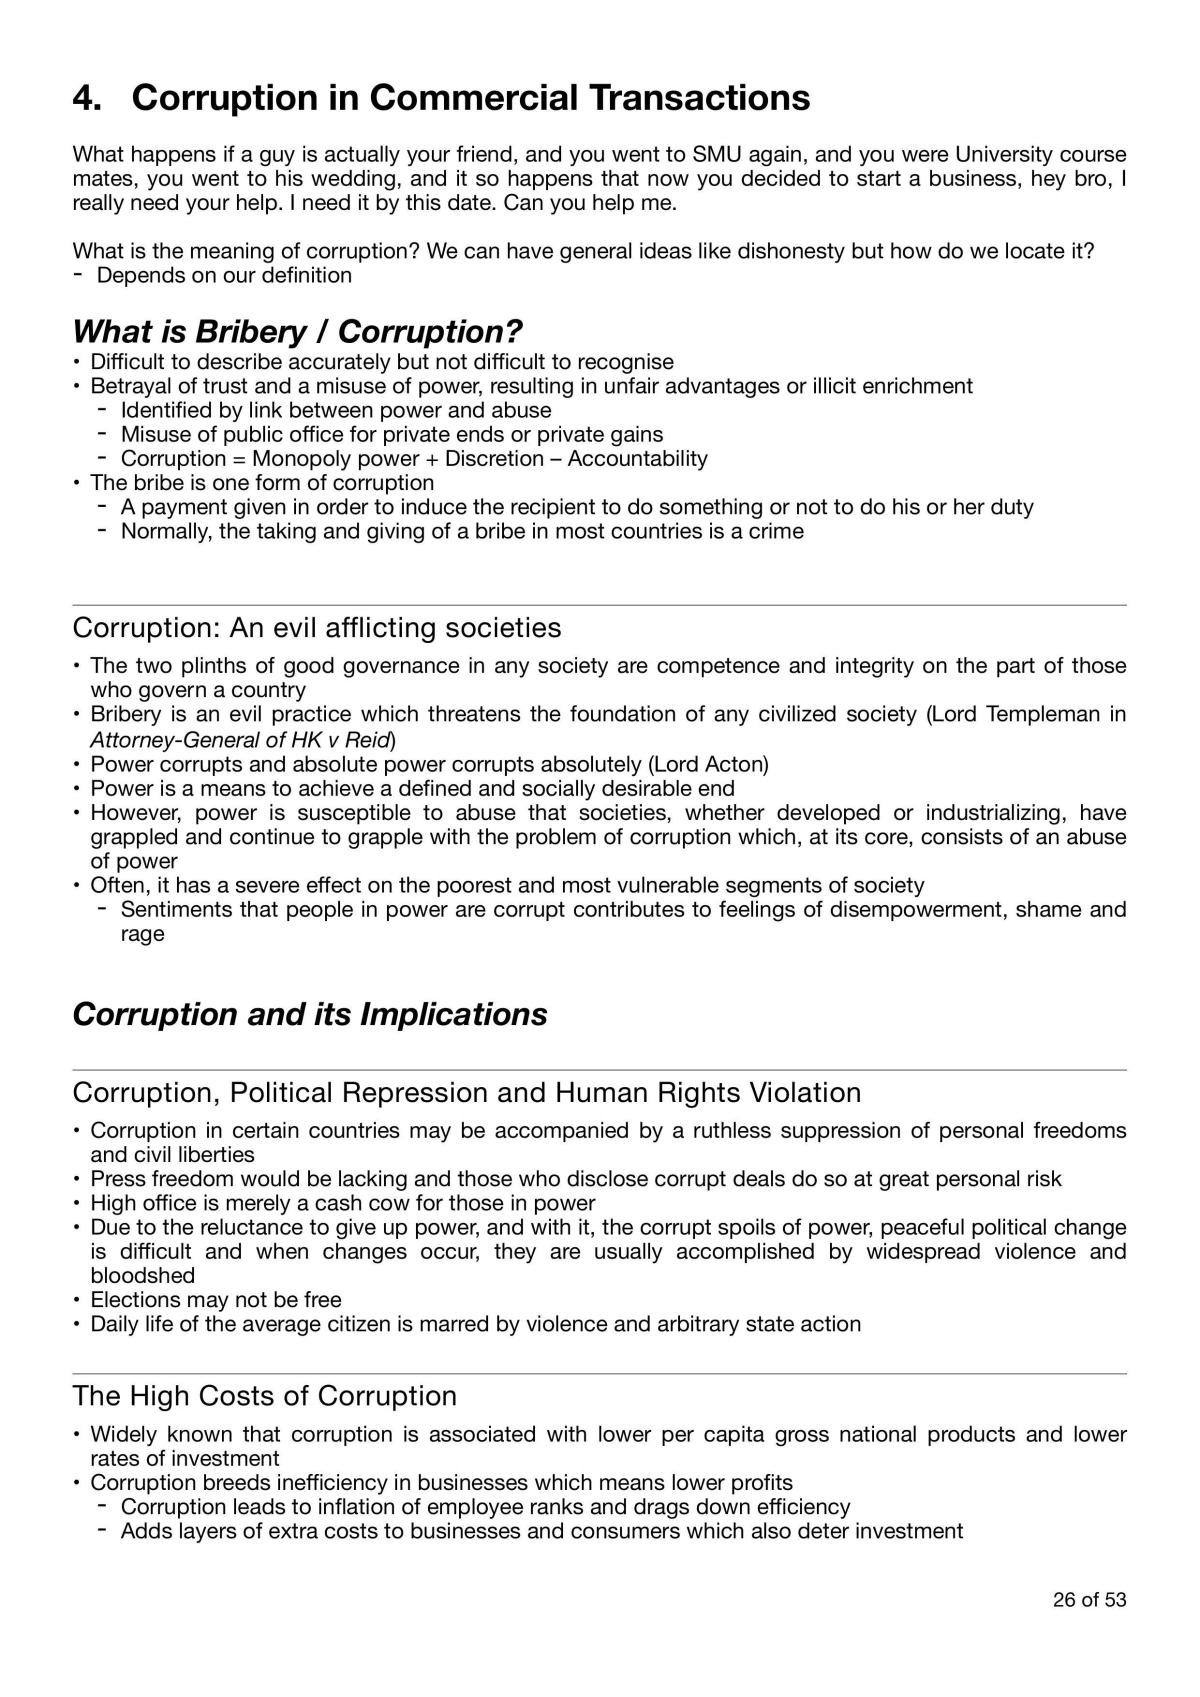 Ethics and Social Responsibility Application Notes - Page 26